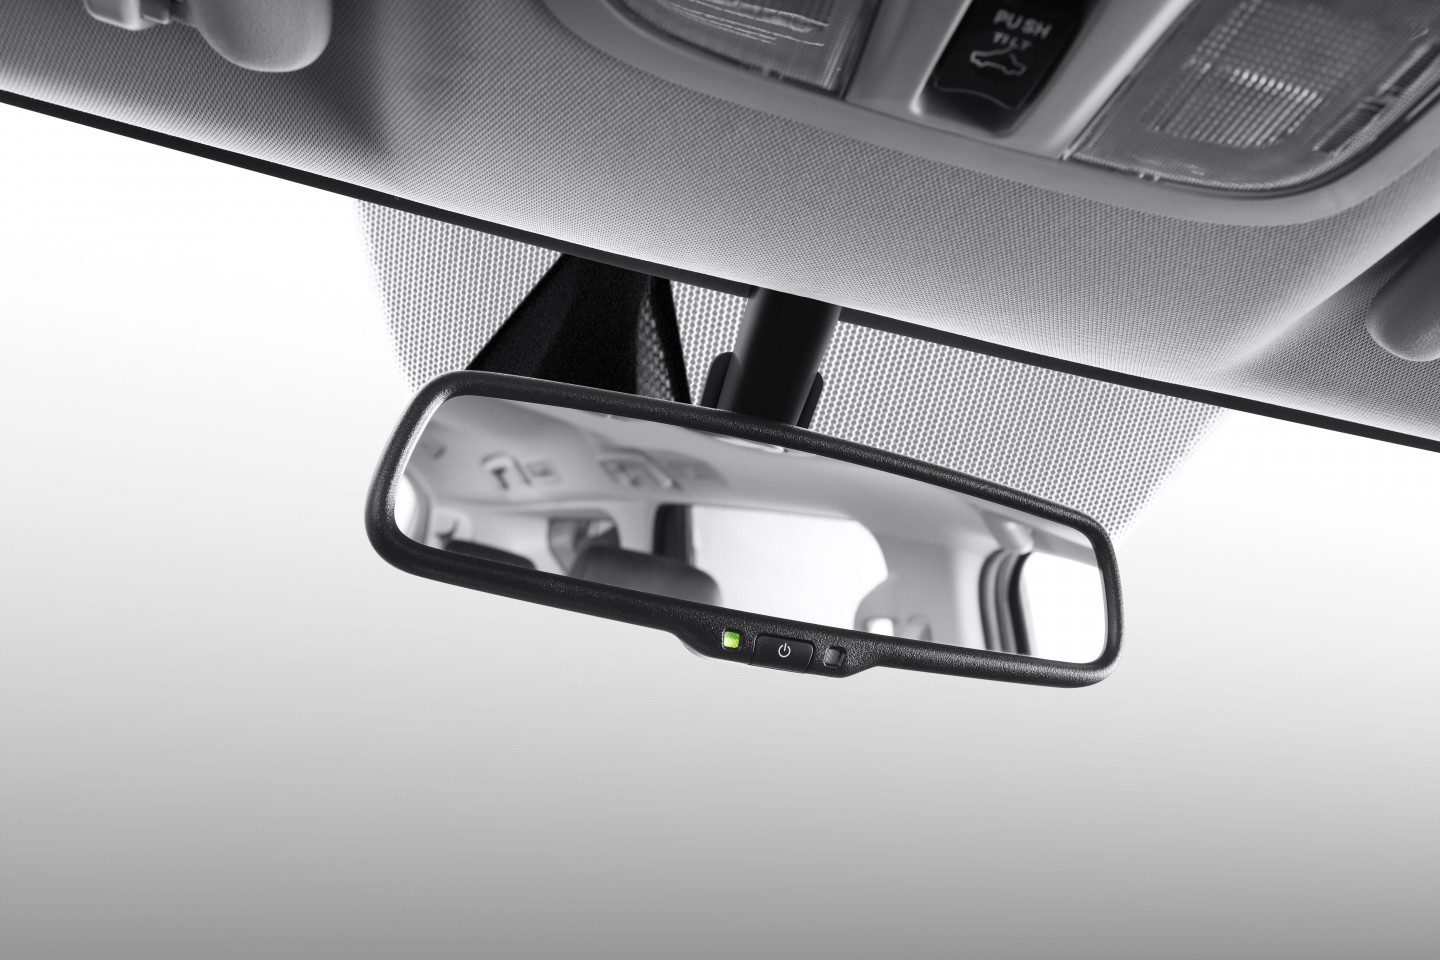 New Auto Dimming Rear View Mirror